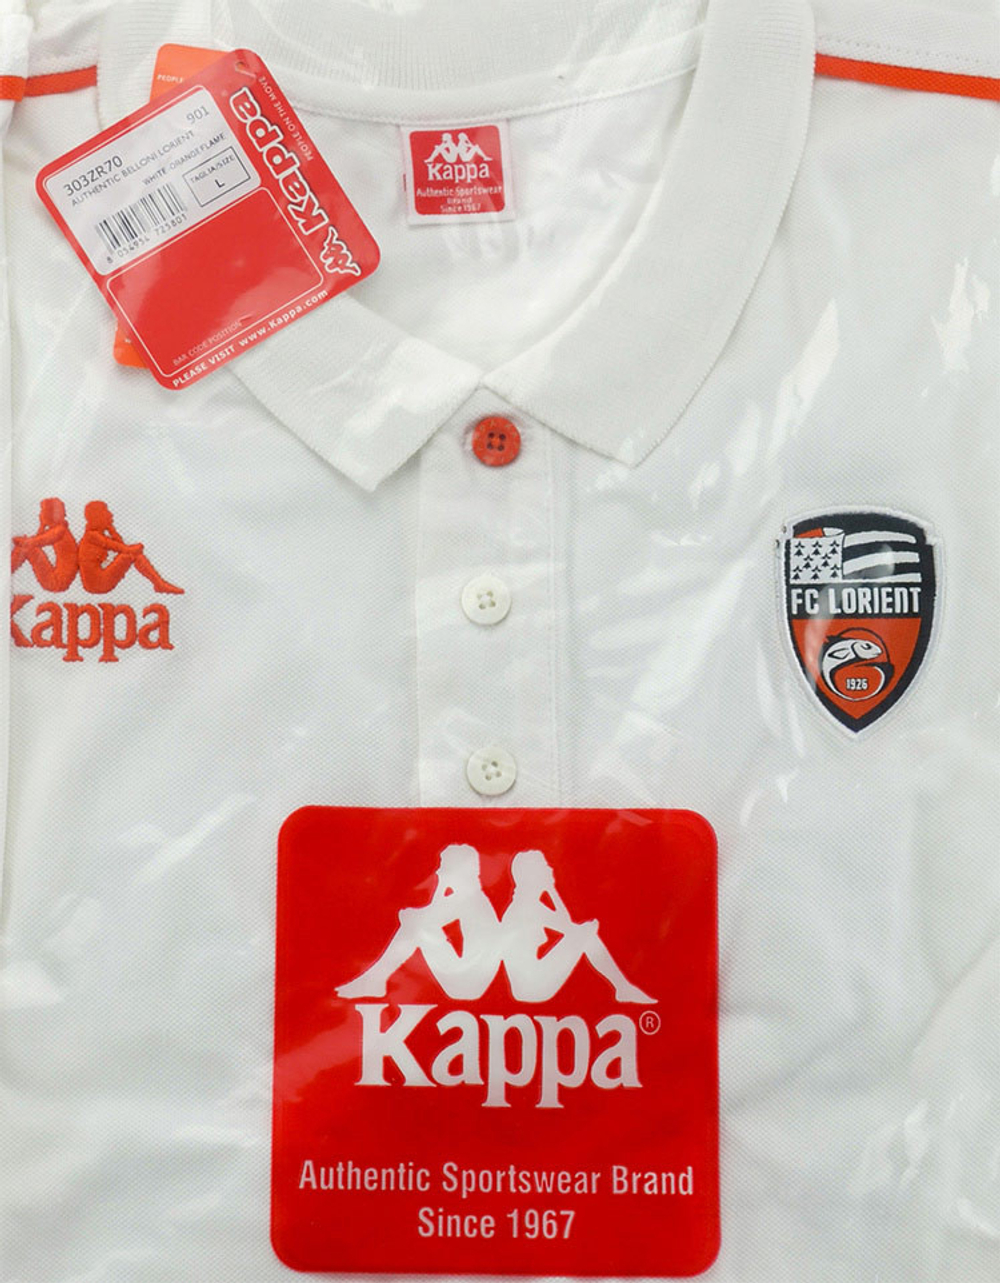 2017-18 FC Lorient Kappa Polo T-Shirt *BNIB*- Other French Clubs View All Clearance New Clearance Training Price Drops